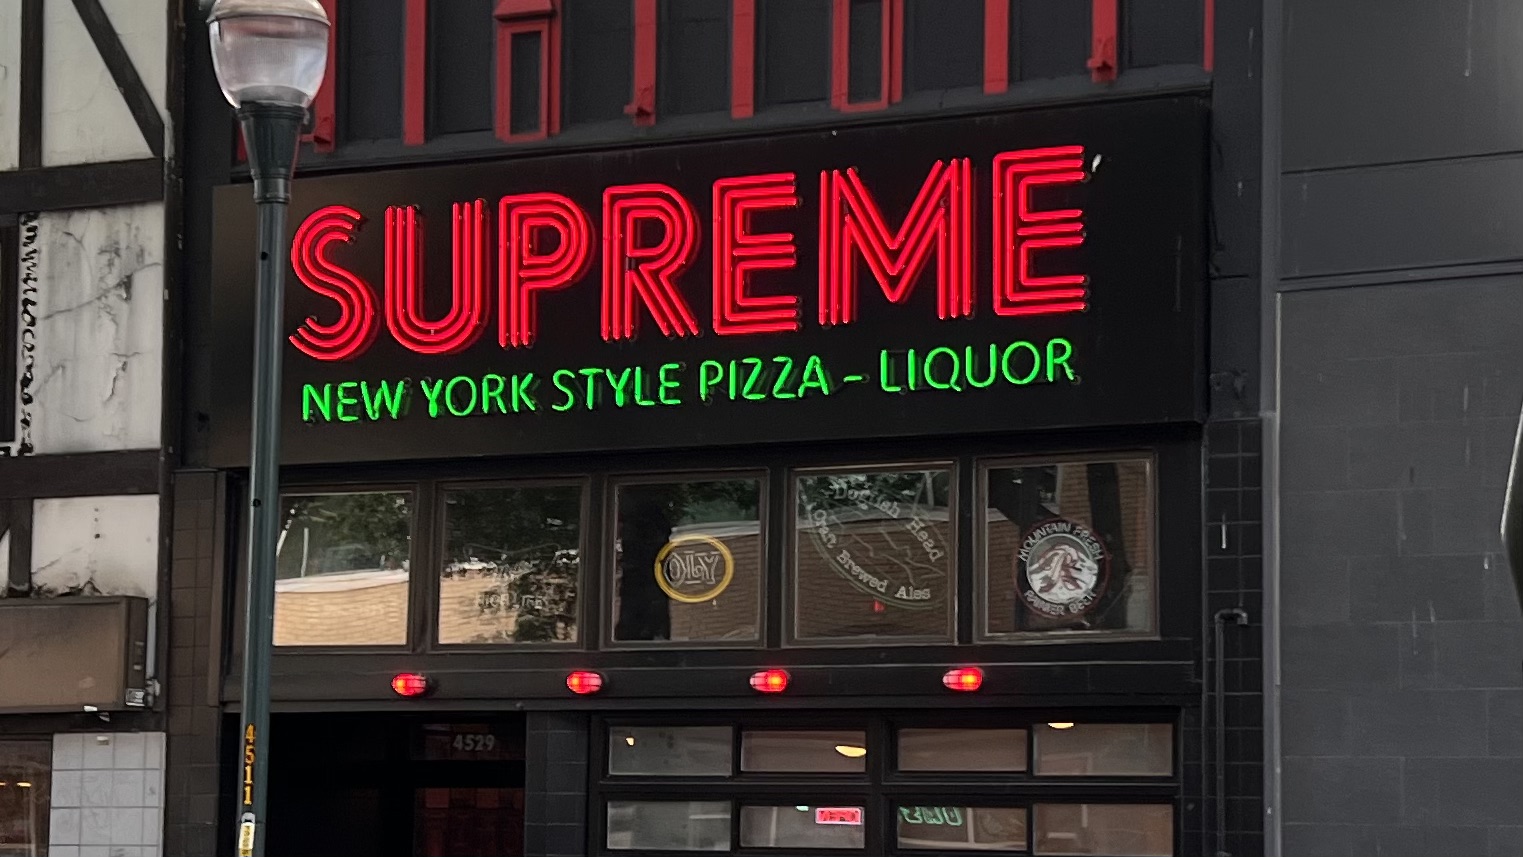 A photo of a restaurant storefront reading Supreme: New York Style Pizza-Liquor, but the dash between pizza and liquor could be mistaken for a hyphen.